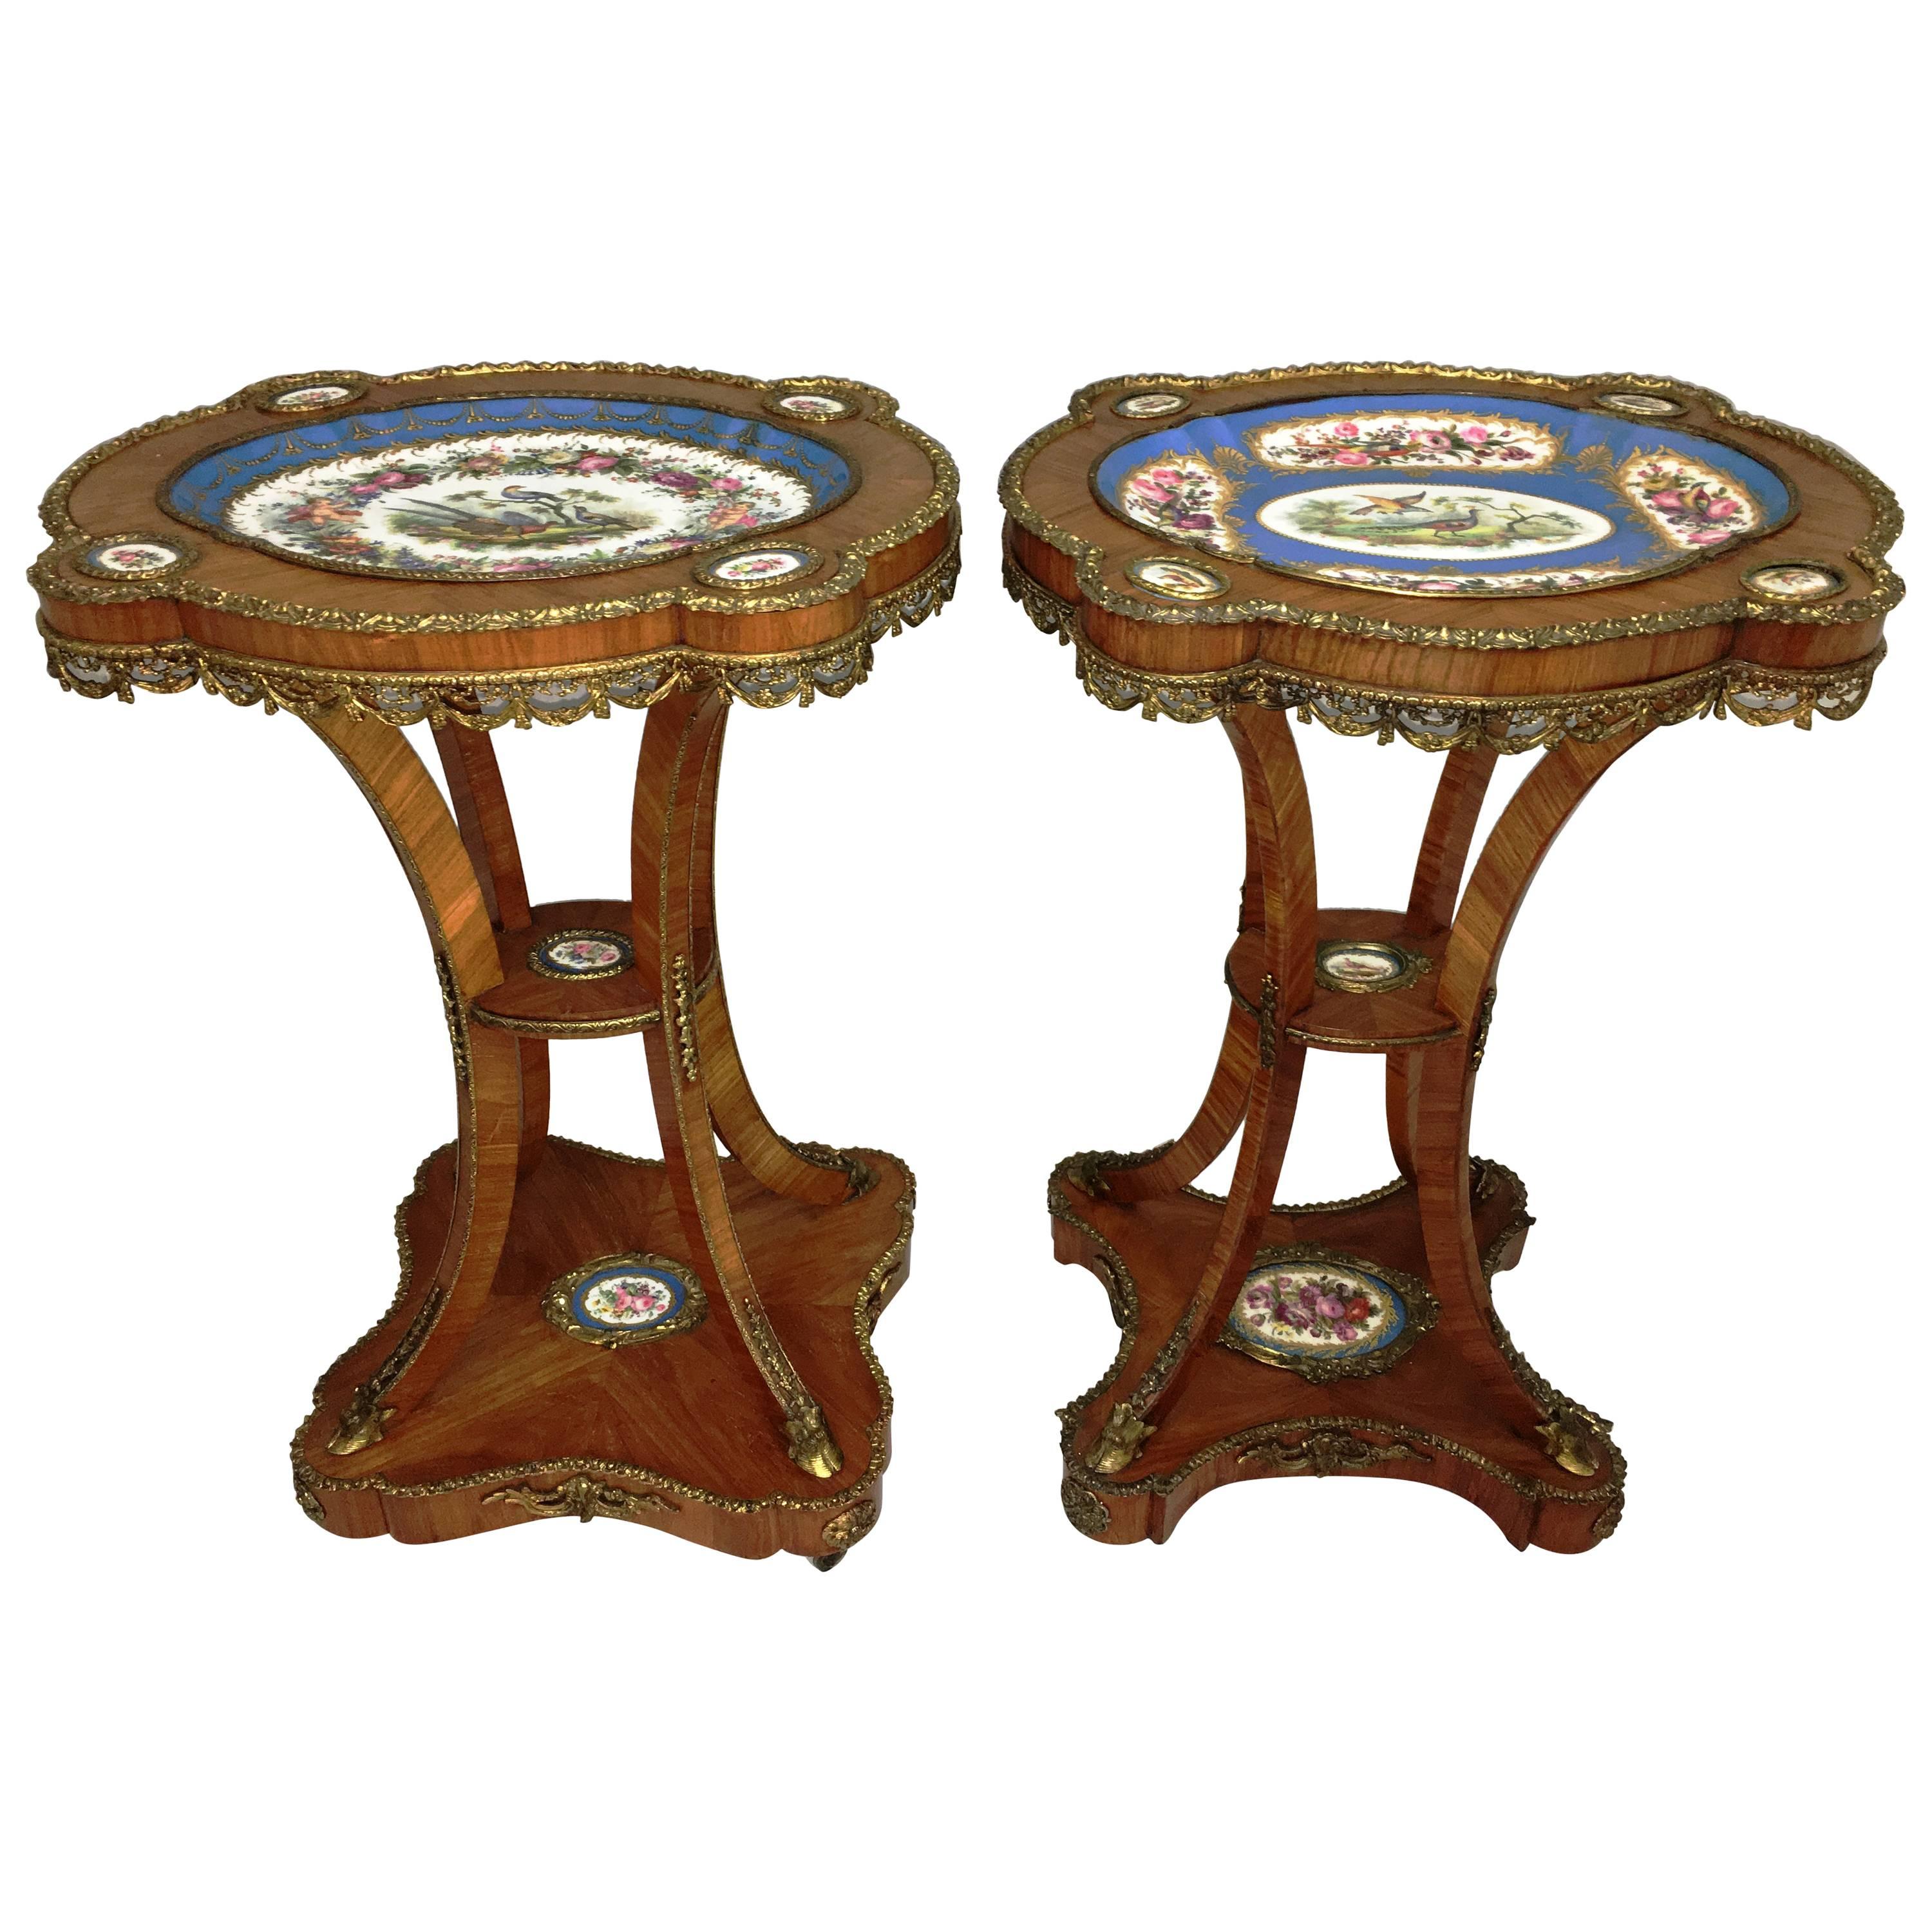 Pair 19th Century French Sèvres style Porcelain Tables For Sale